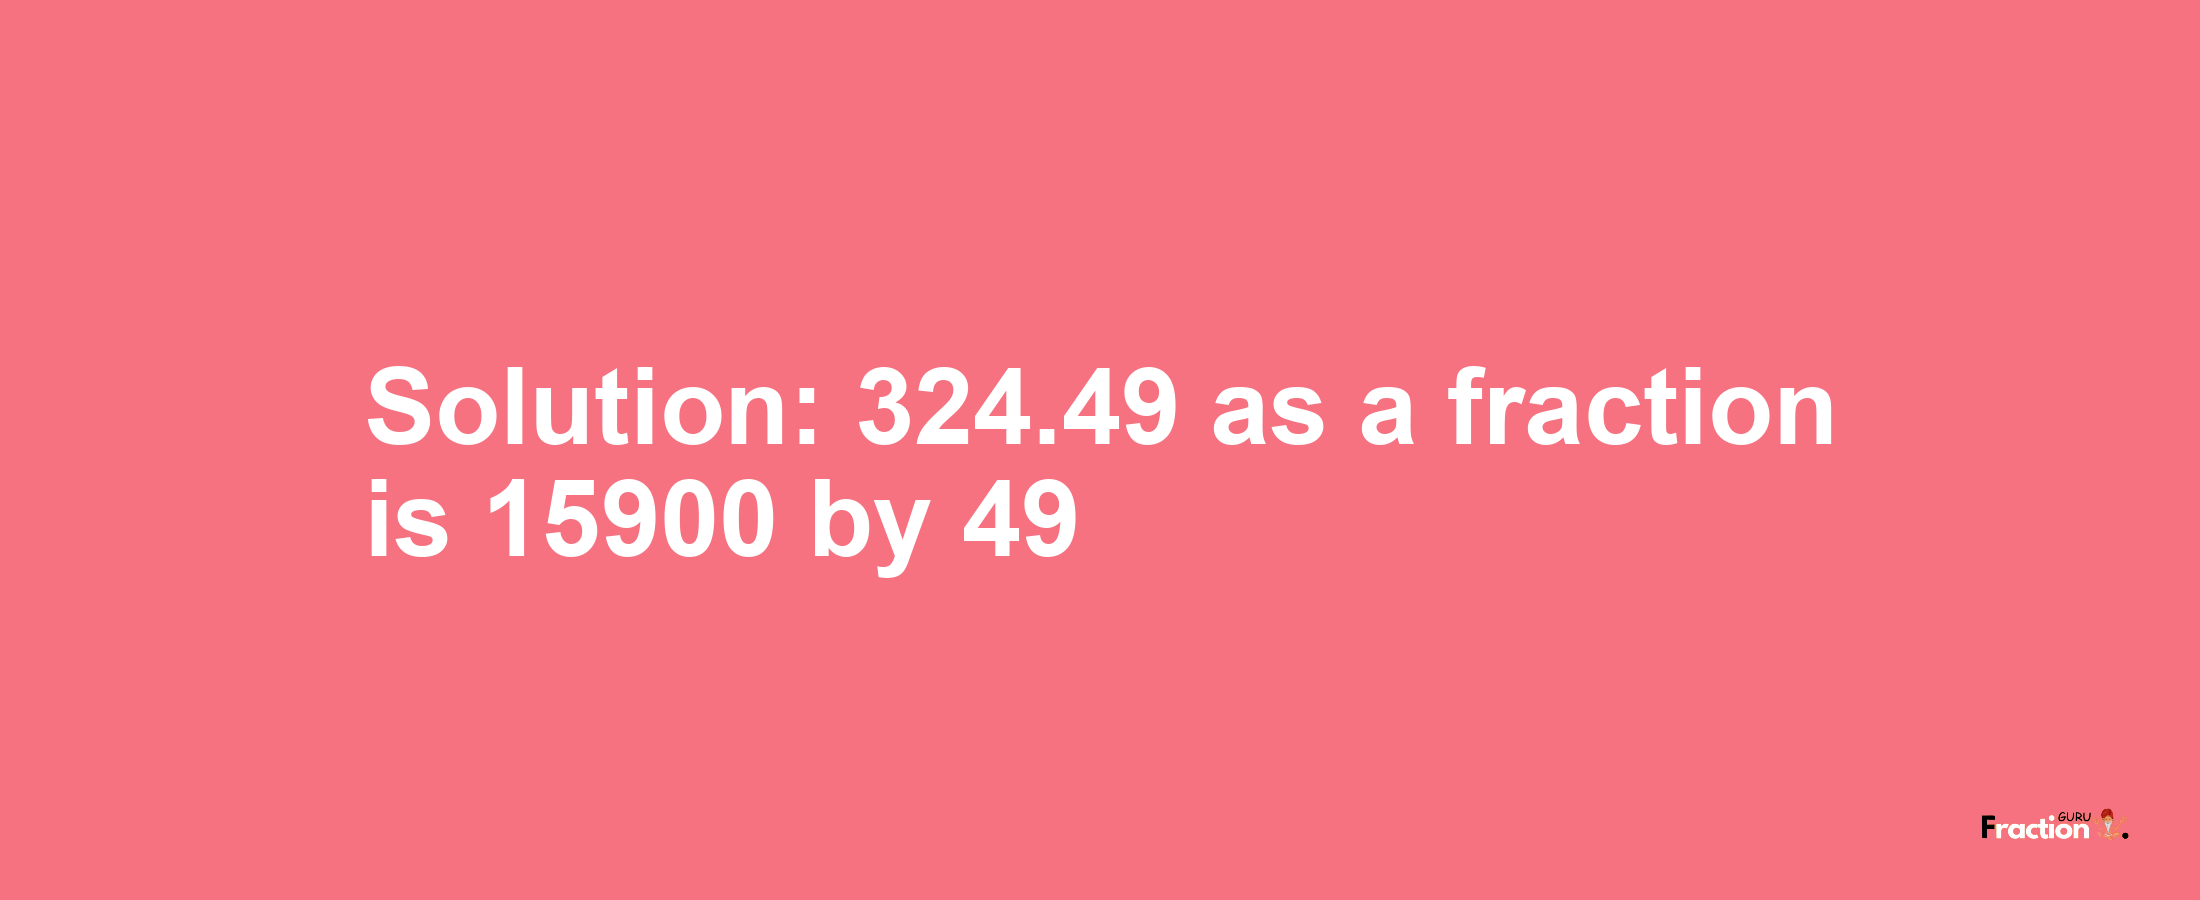 Solution:324.49 as a fraction is 15900/49